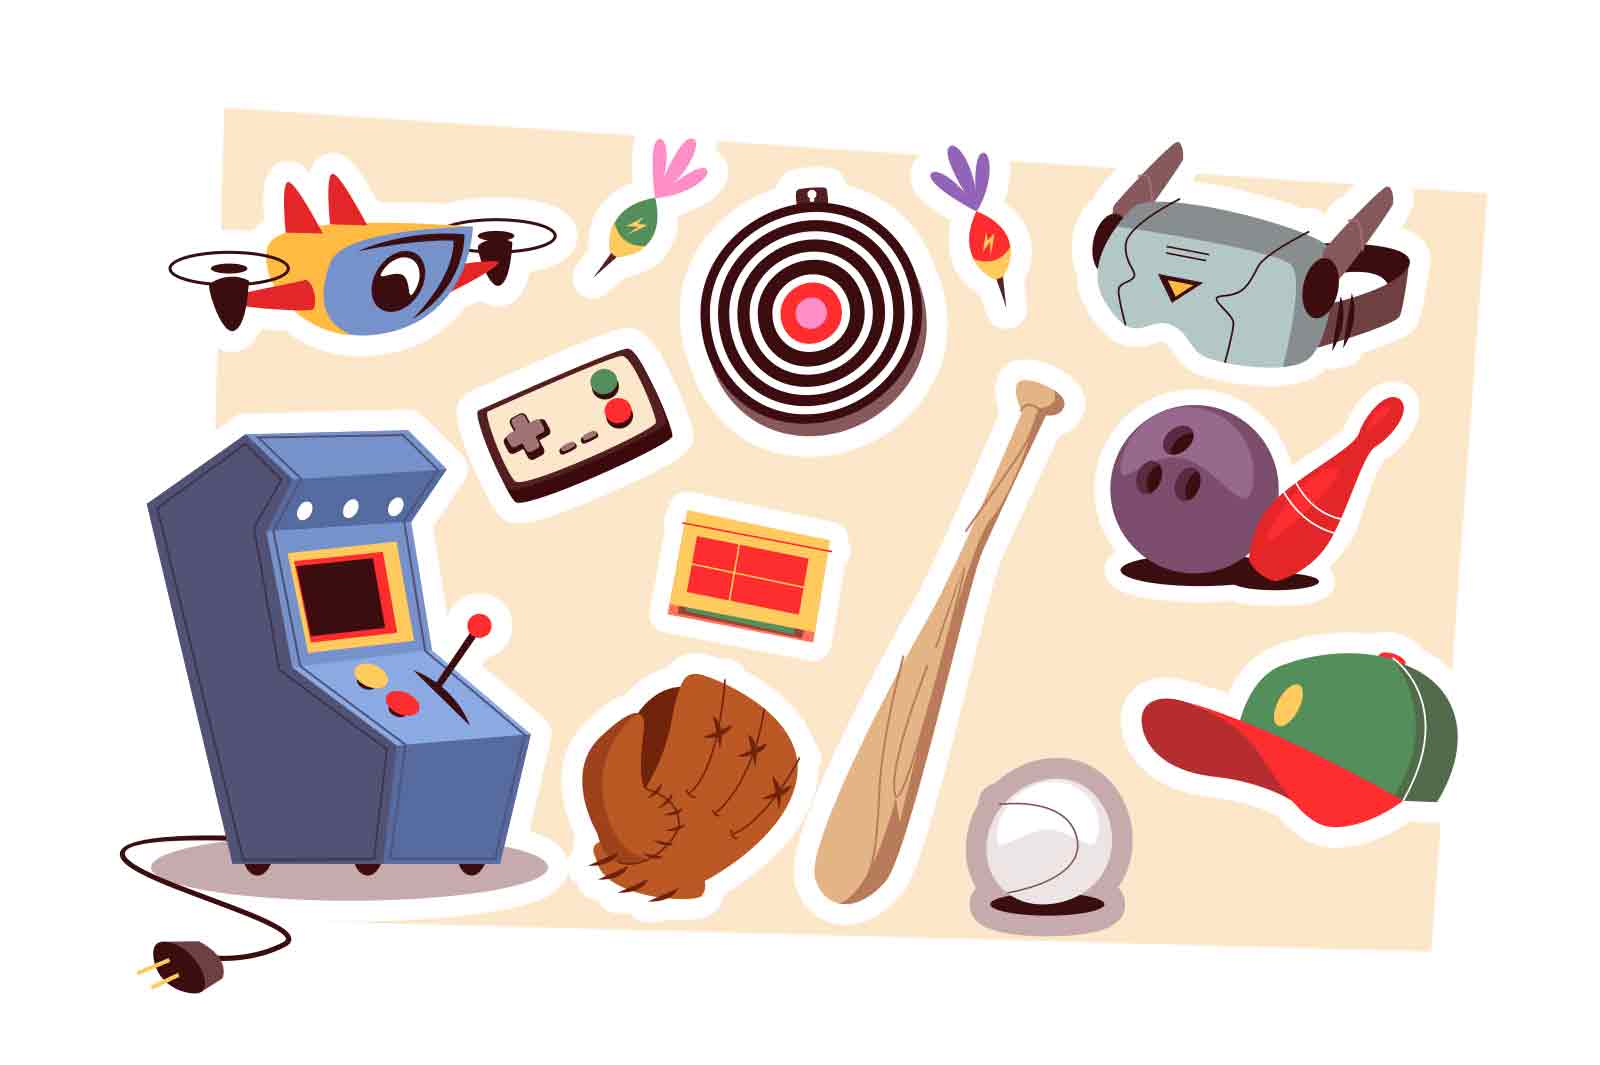 Active games tools and equipment set vector illustration. Bowling, baseball, computer games, vr glasses and slot machine flat style concept